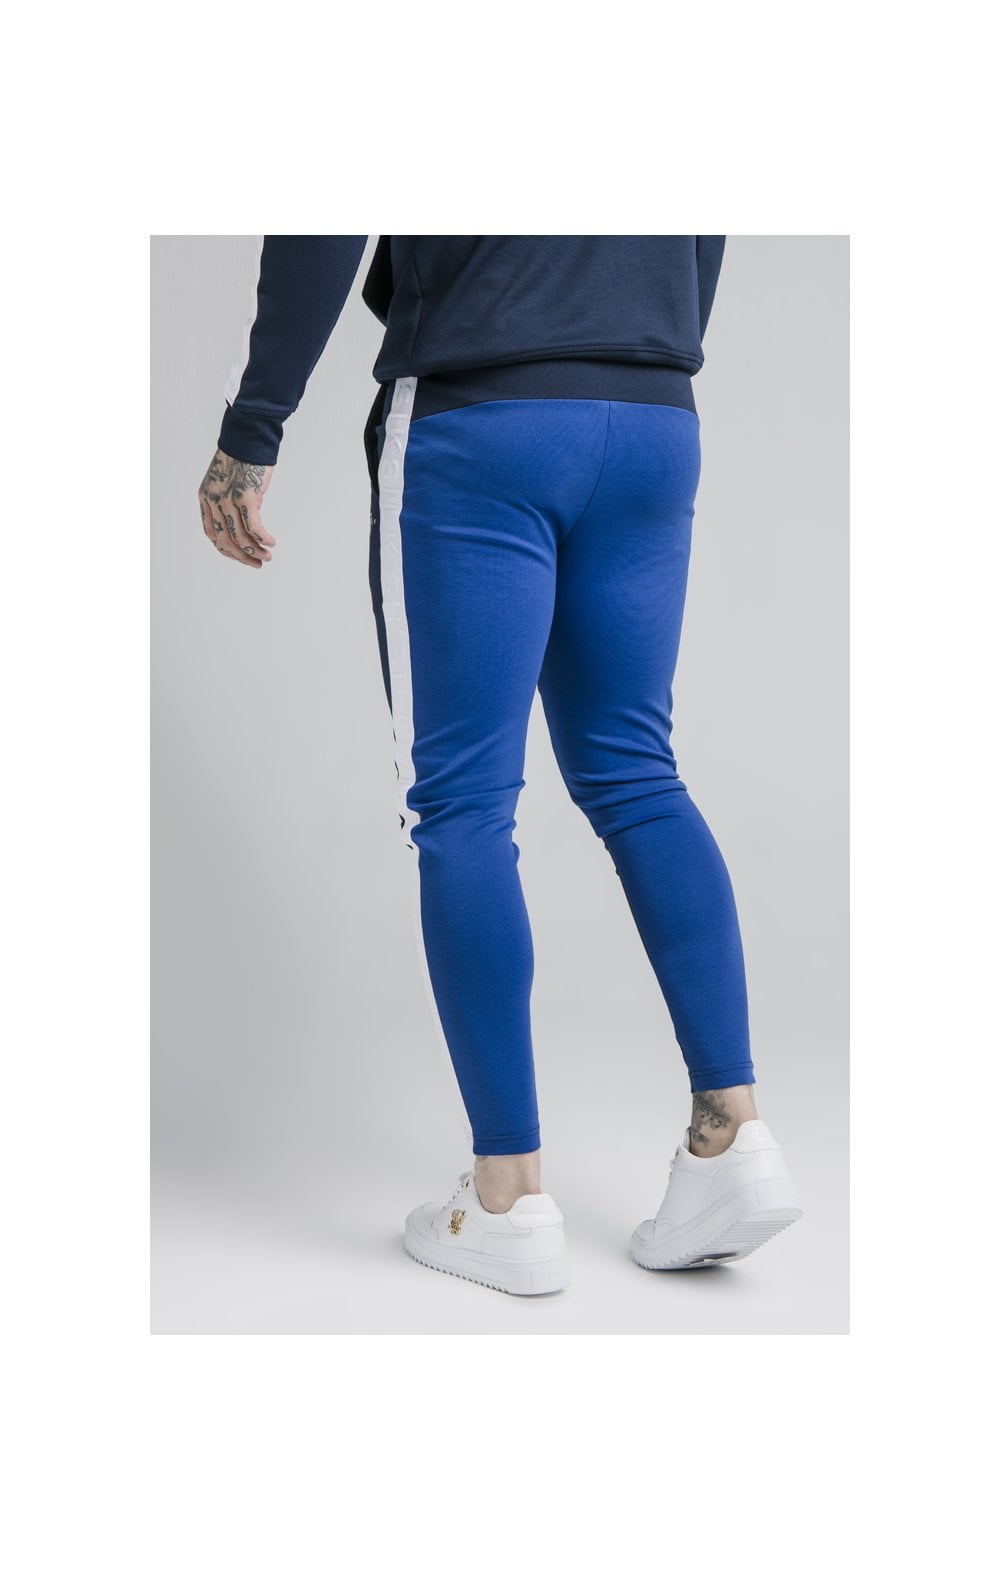 Load image into Gallery viewer, SikSilk Inverse Tape Track Pants - Navy (1)